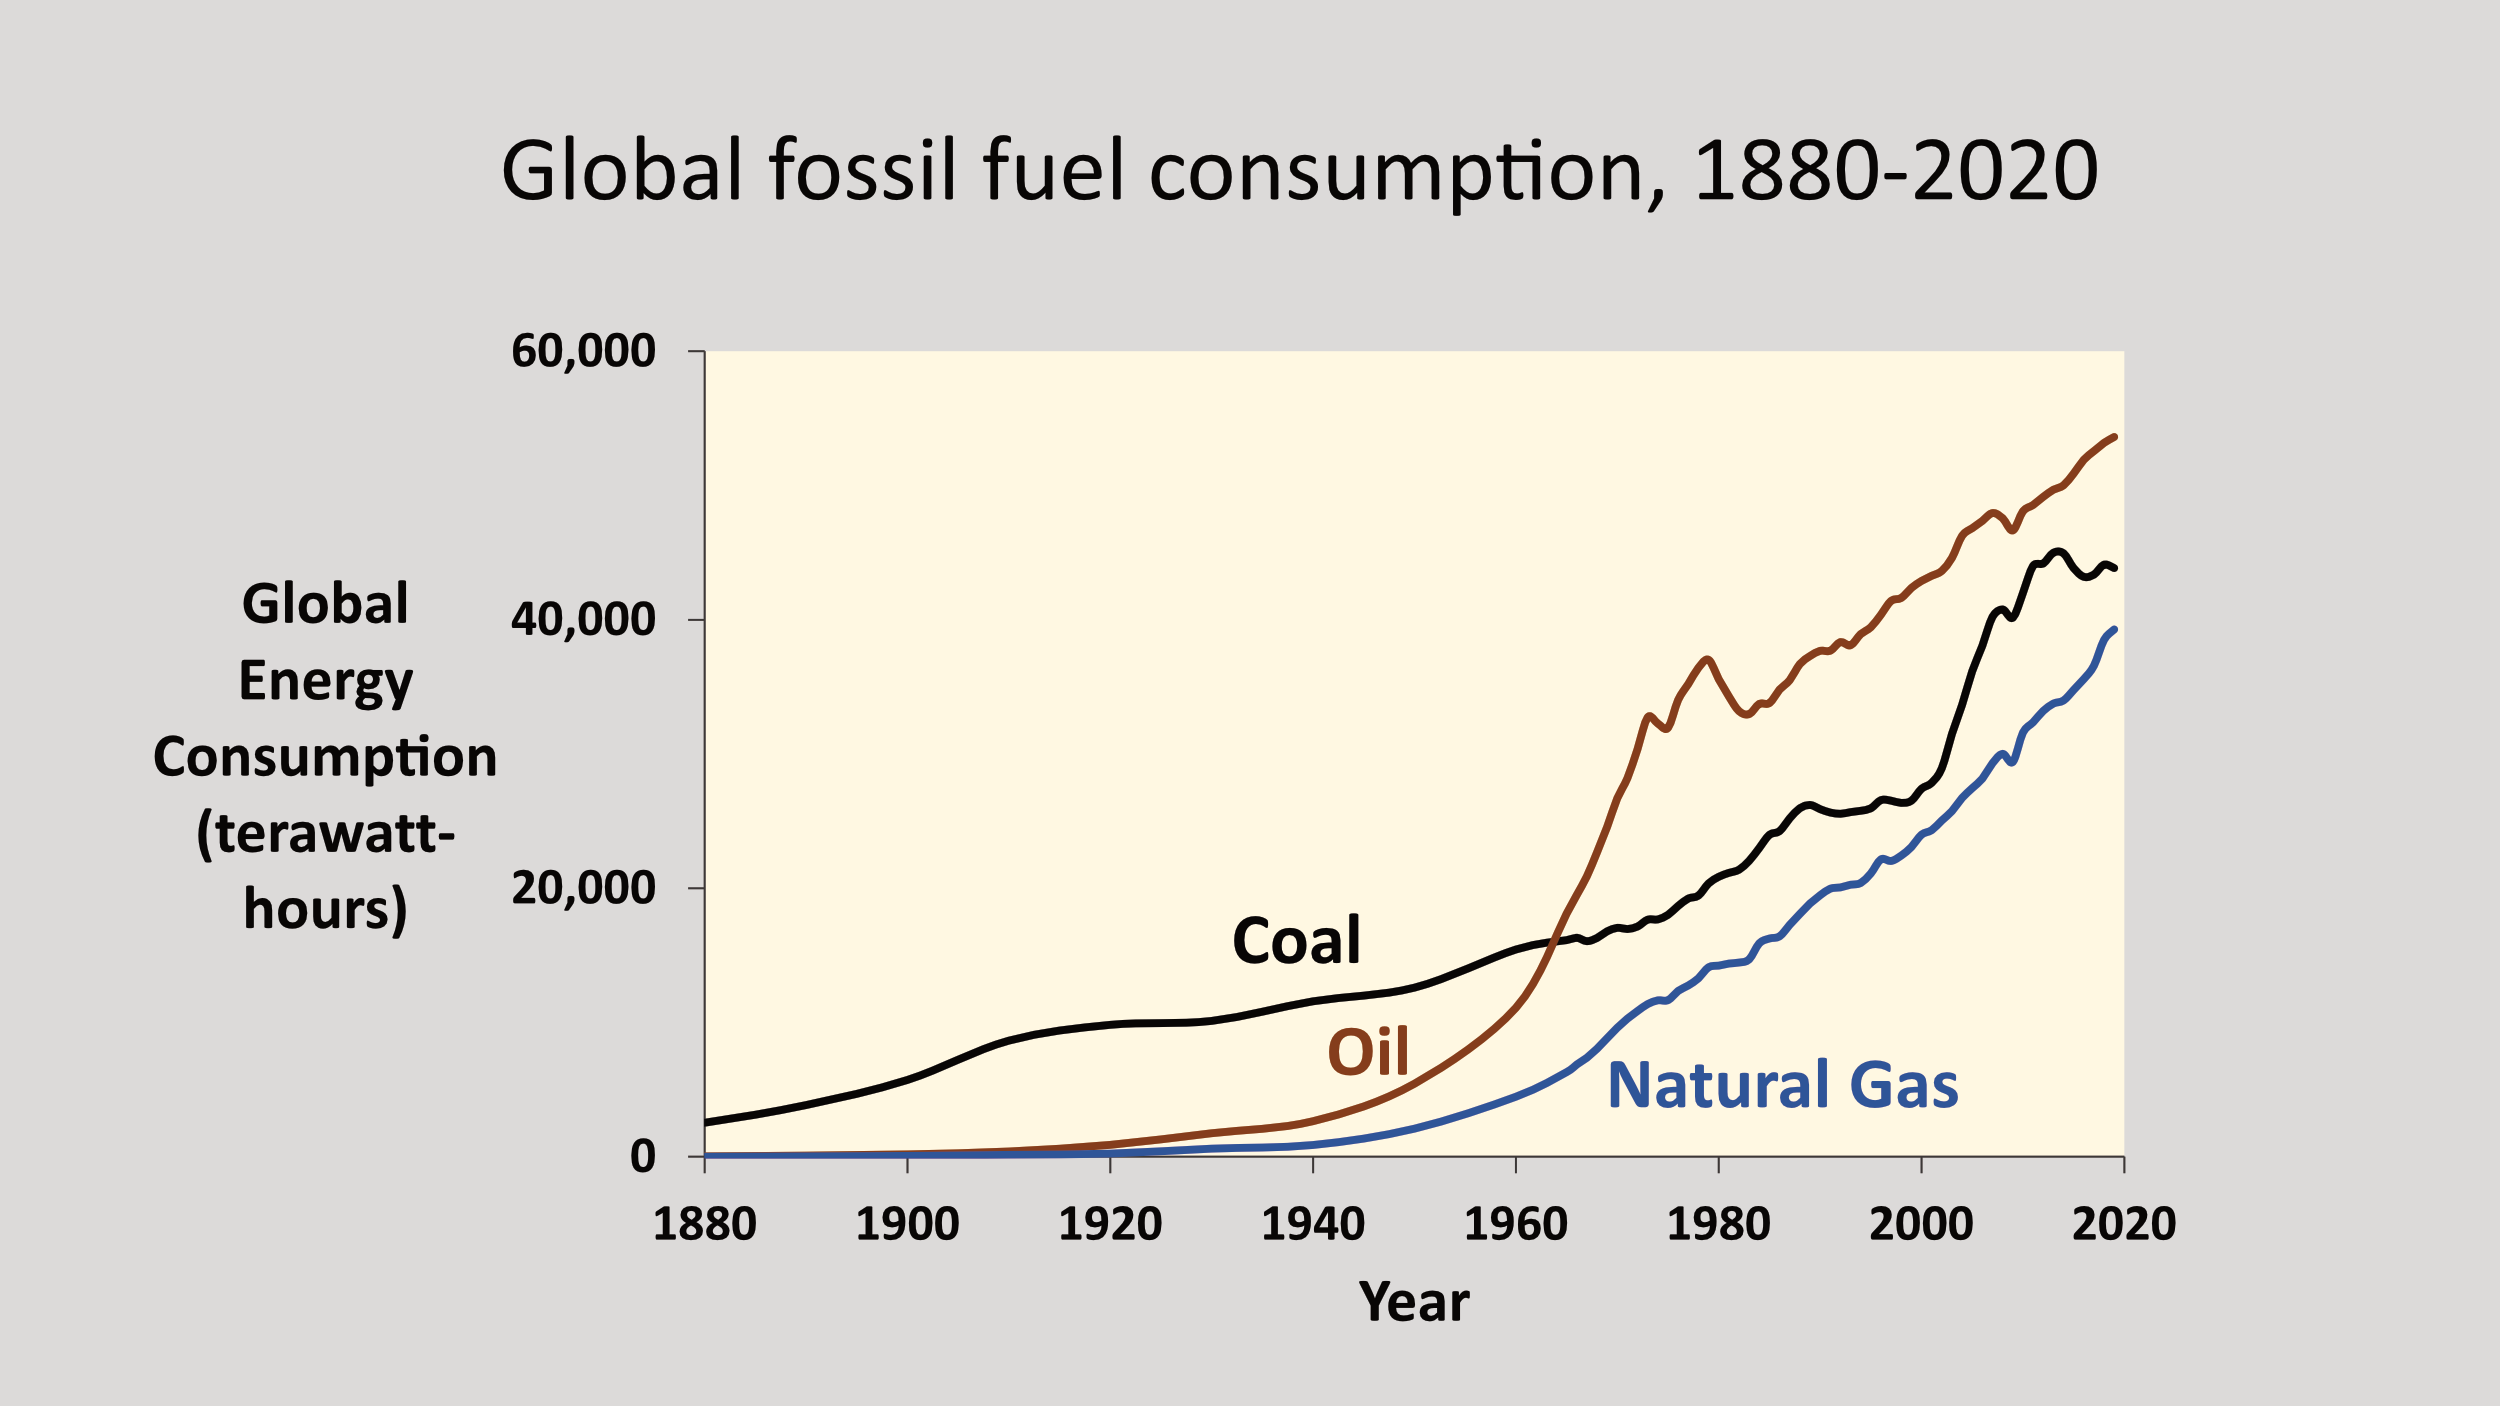 Graph showing how global consumption of oil, coal, and natural gas have increased from 1880 to 2020.